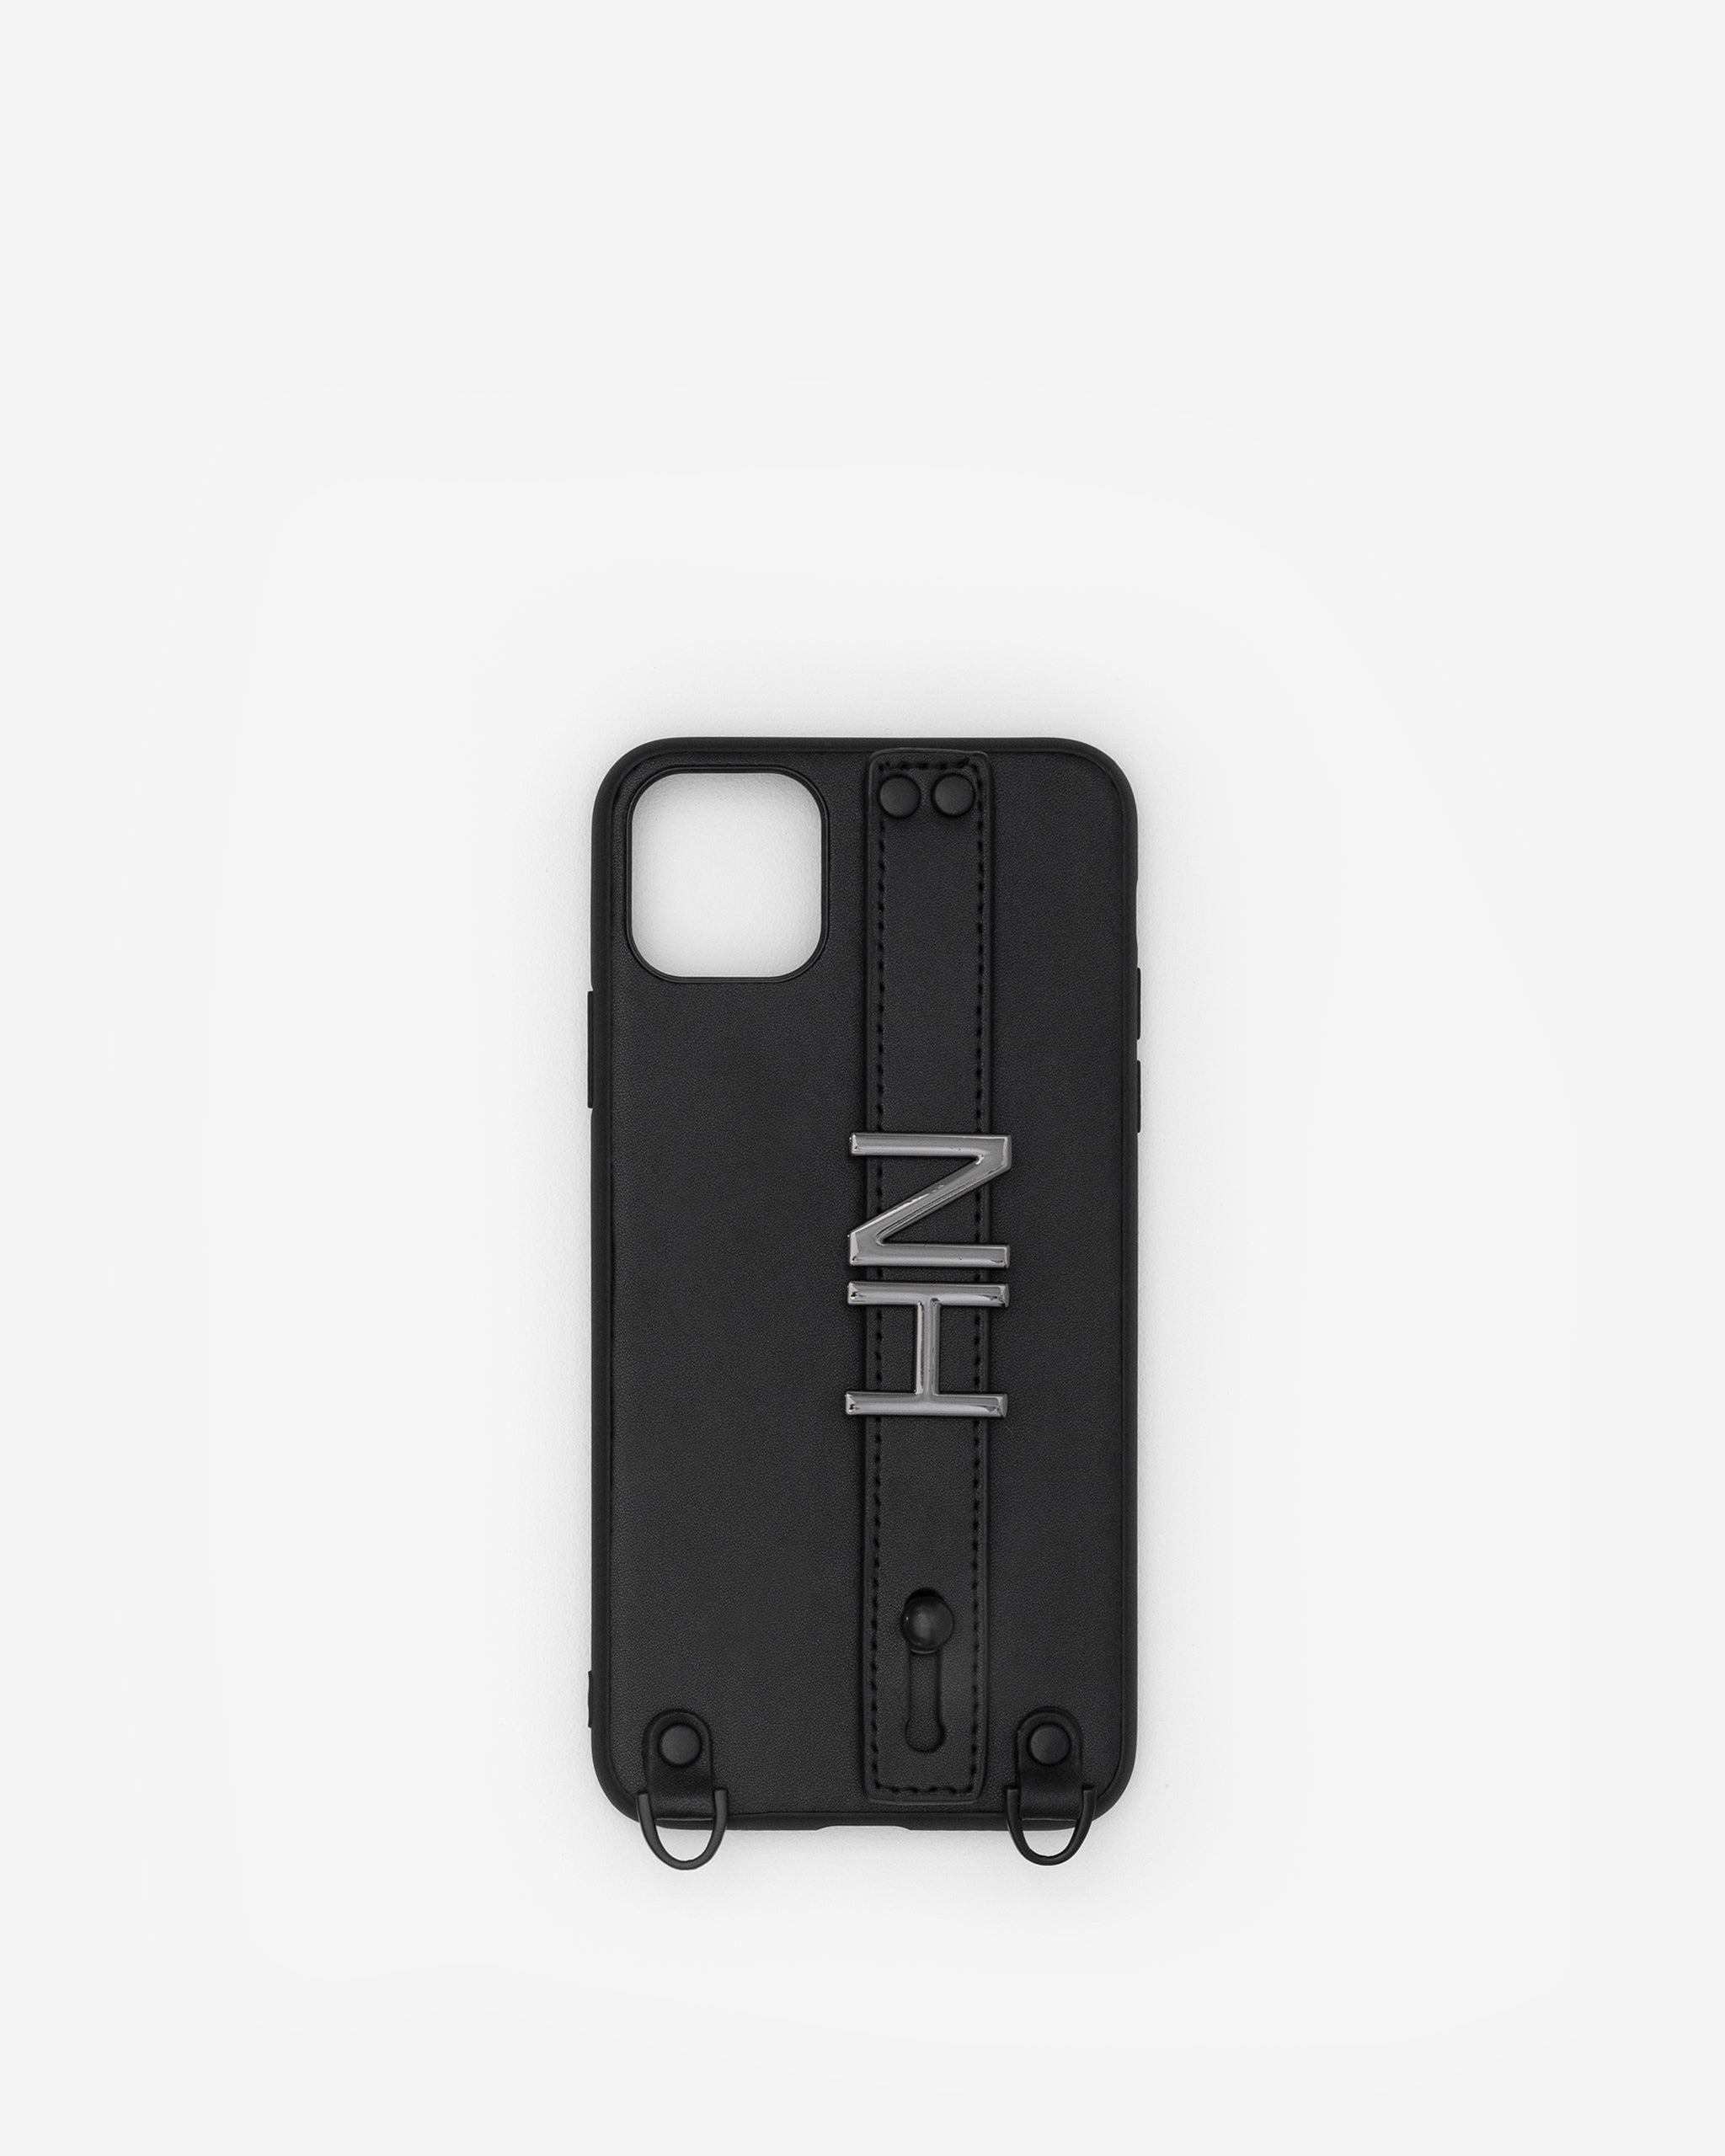 iPhone 11 Pro Max Case in Black/Gunmetal with Personalised Hardware